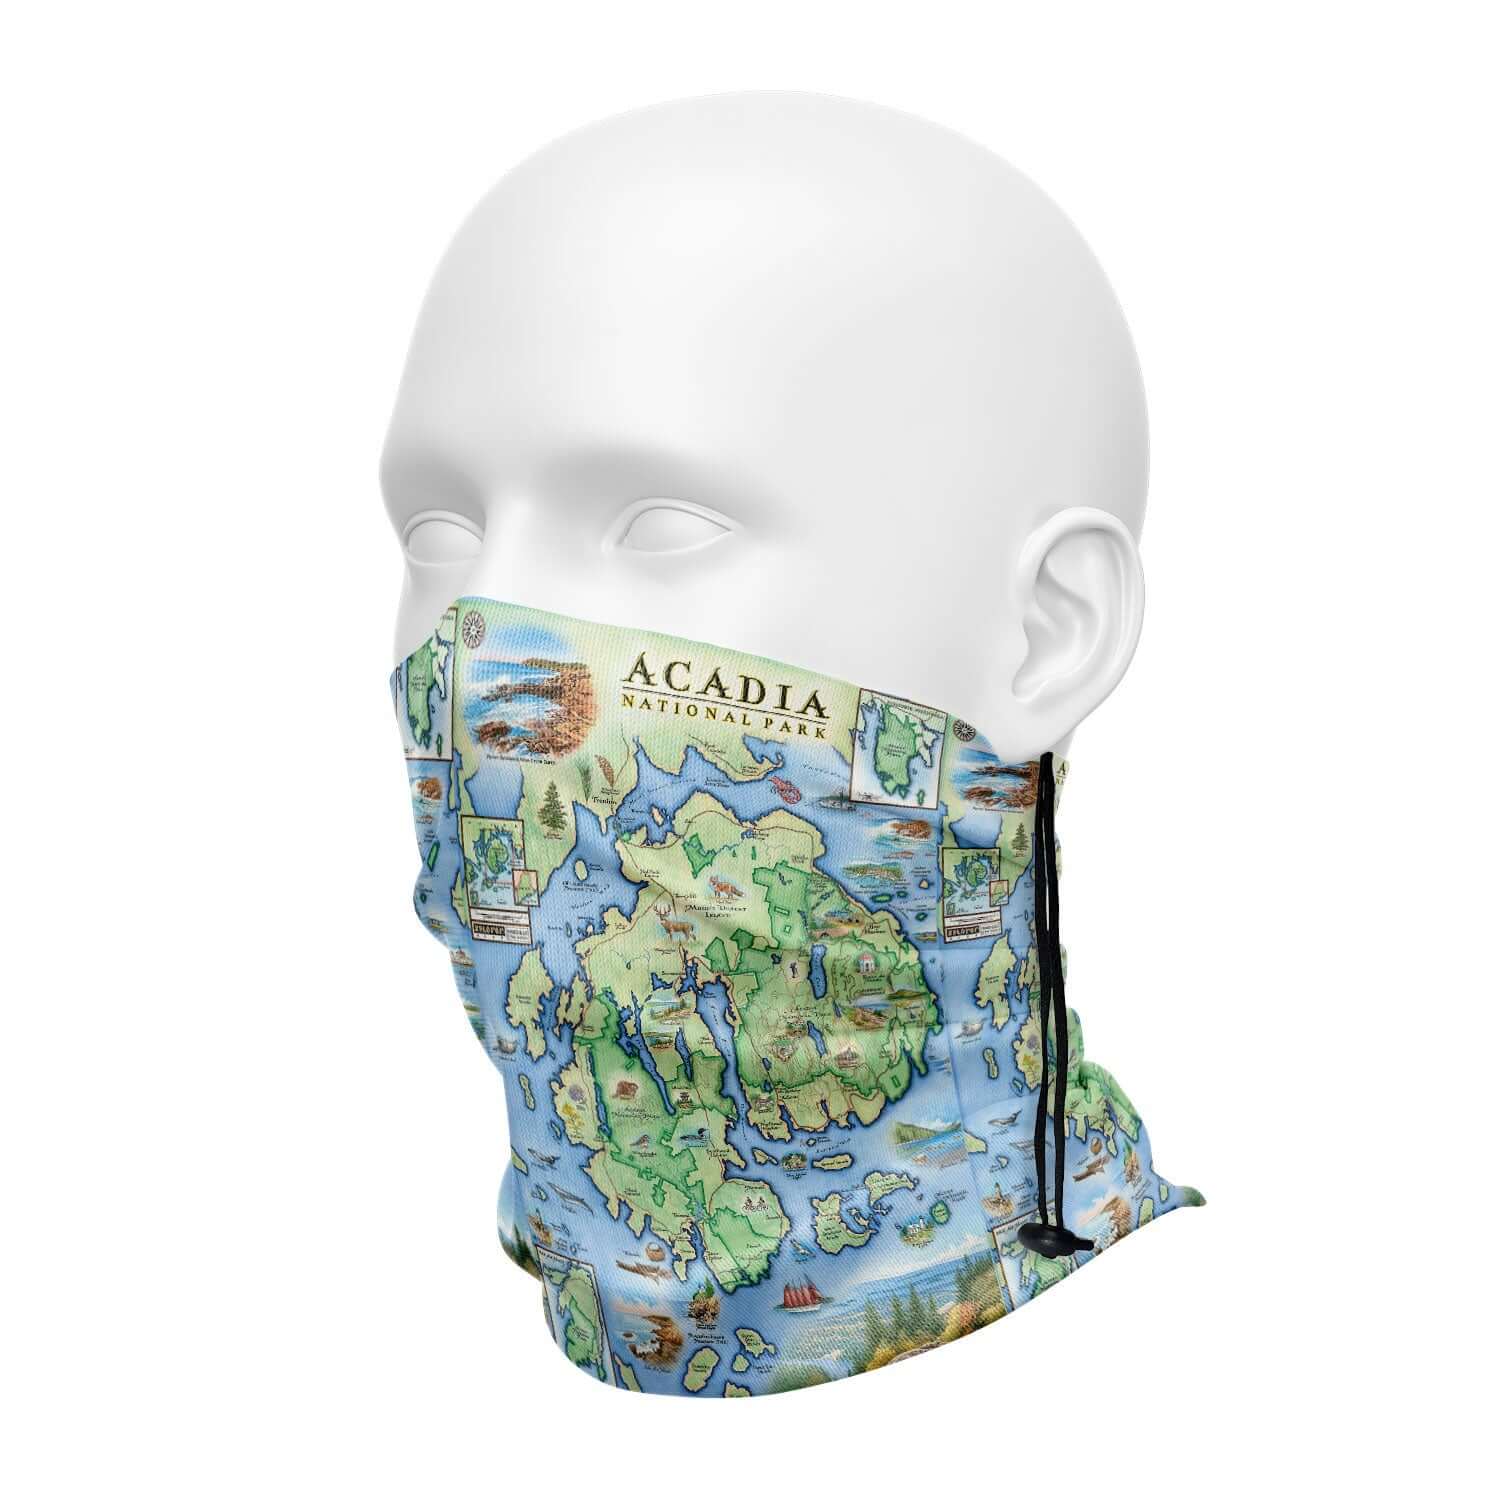 Maine's Acadia National Park Map Neck Gaiter or face covering in earth tones features Cadillac Mountains, lobster, fishing boats. 